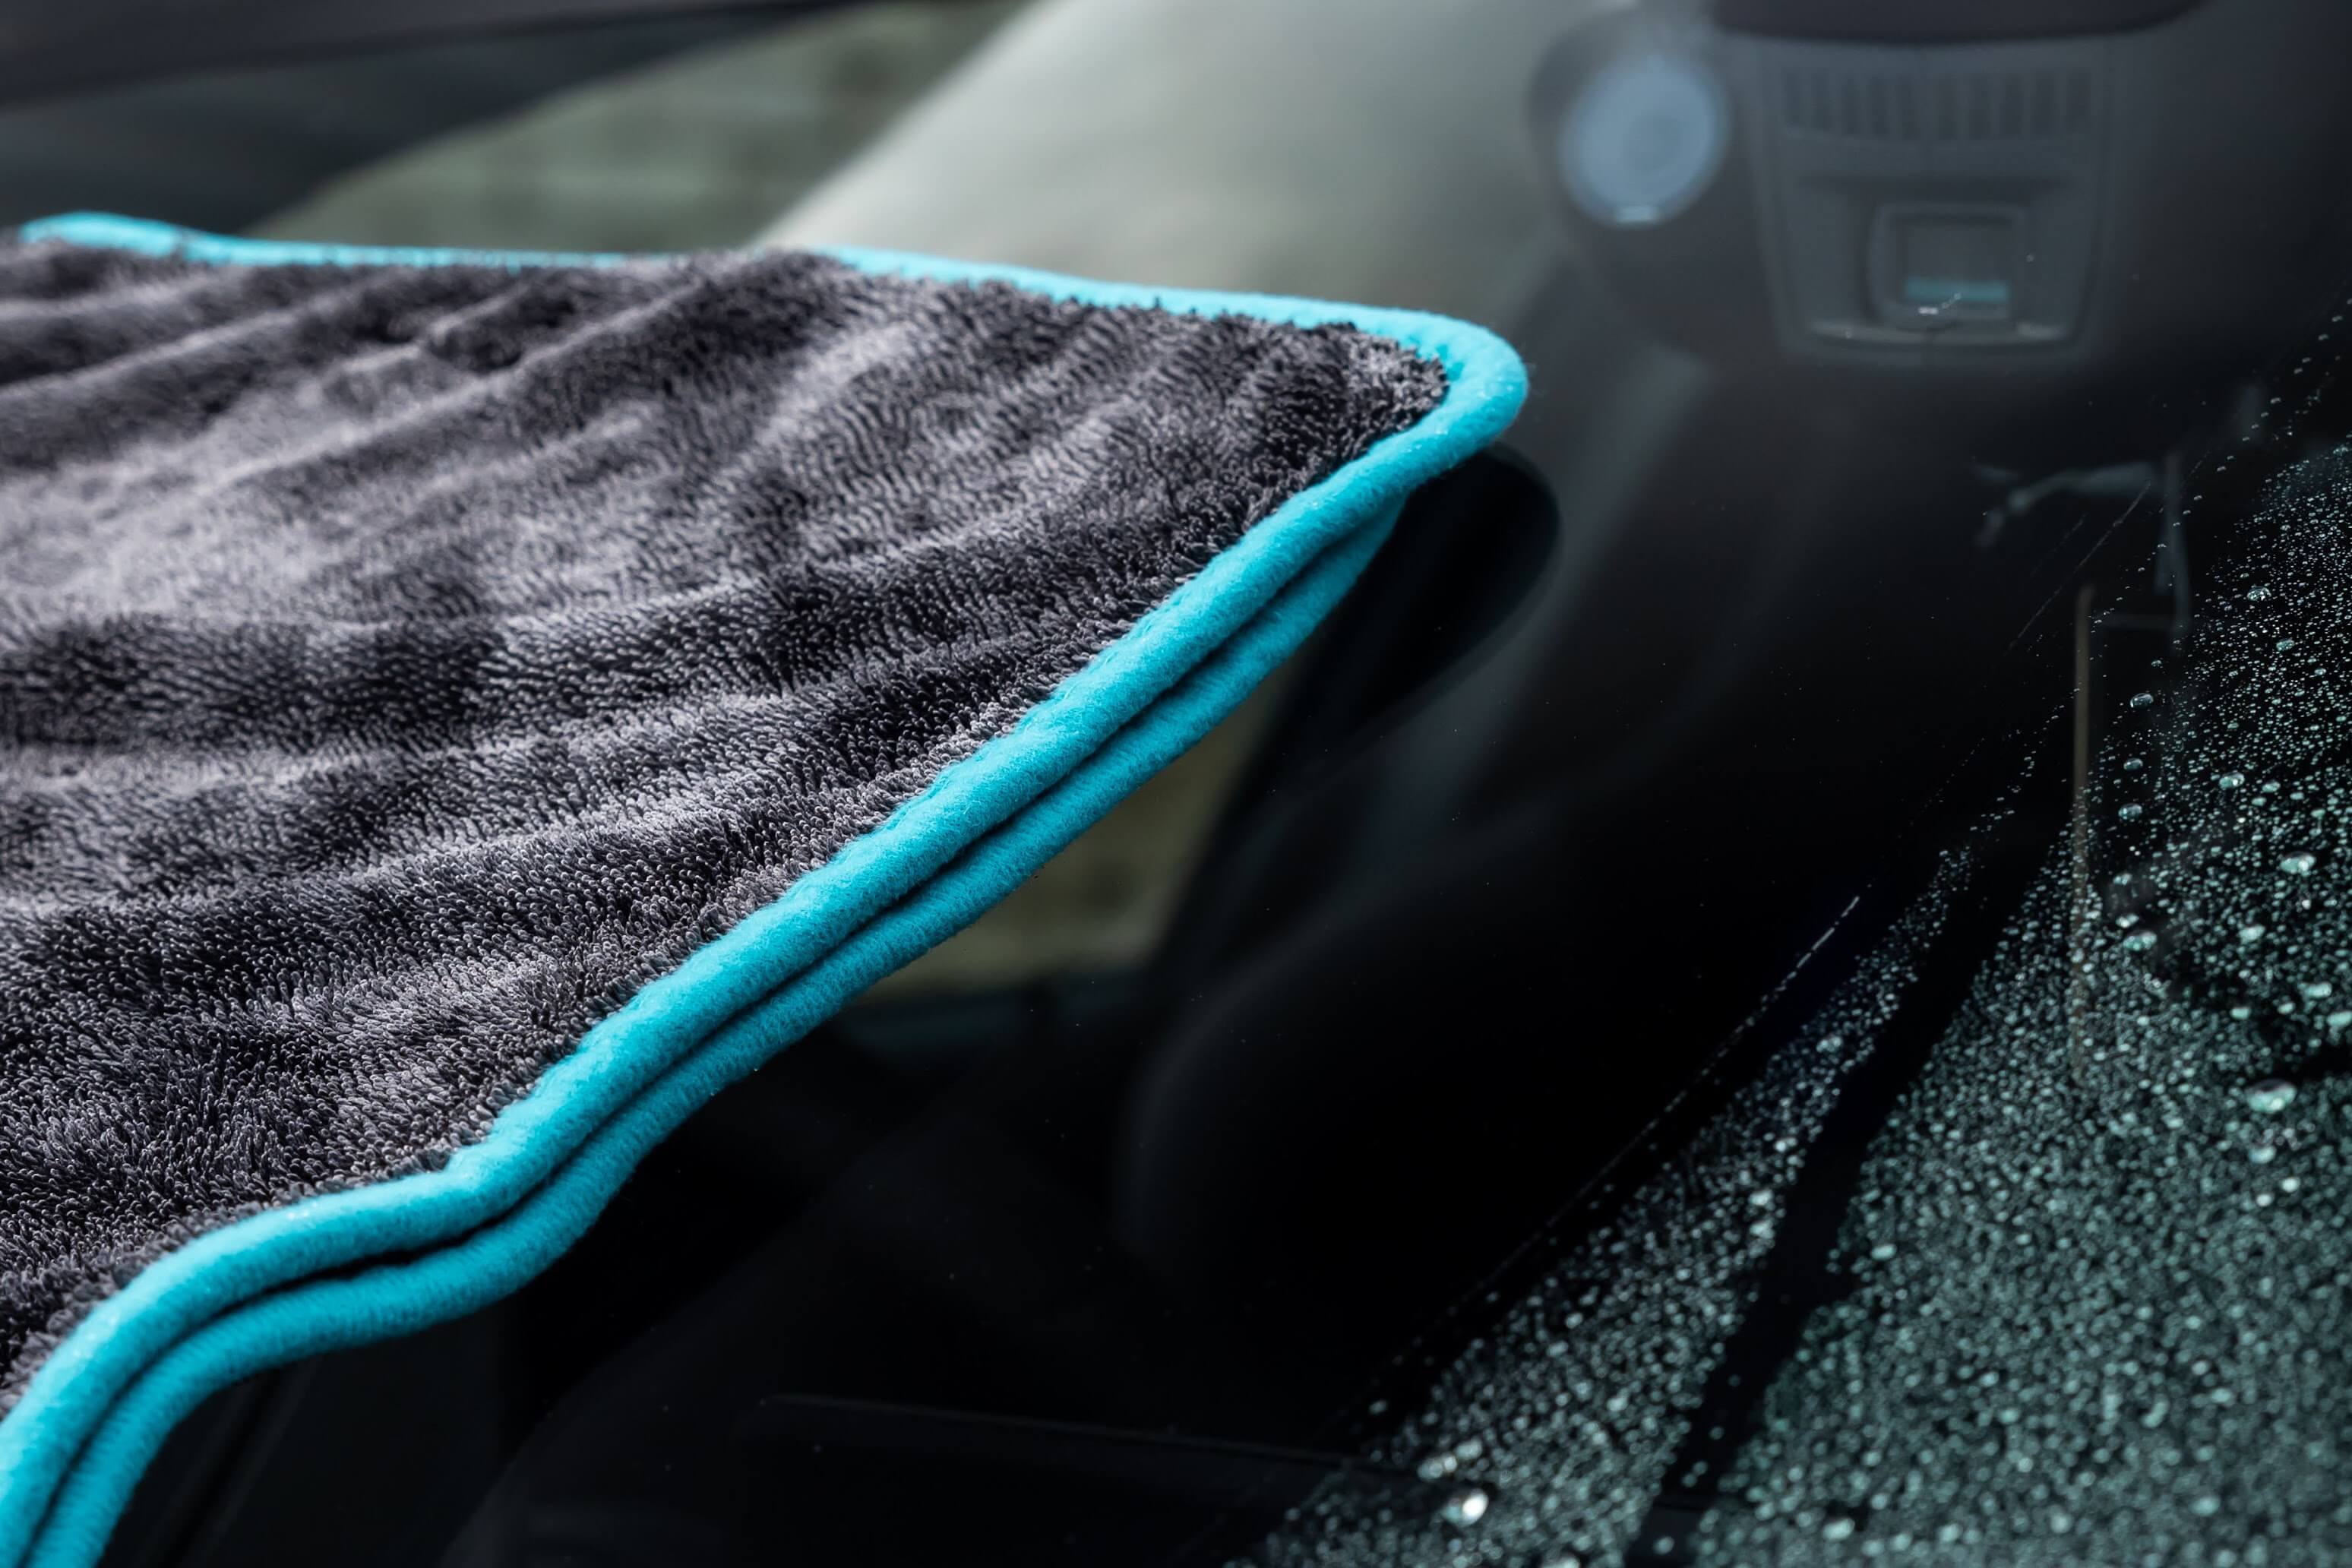 Silk Drying Towel - The Ultimate car detailing accessories